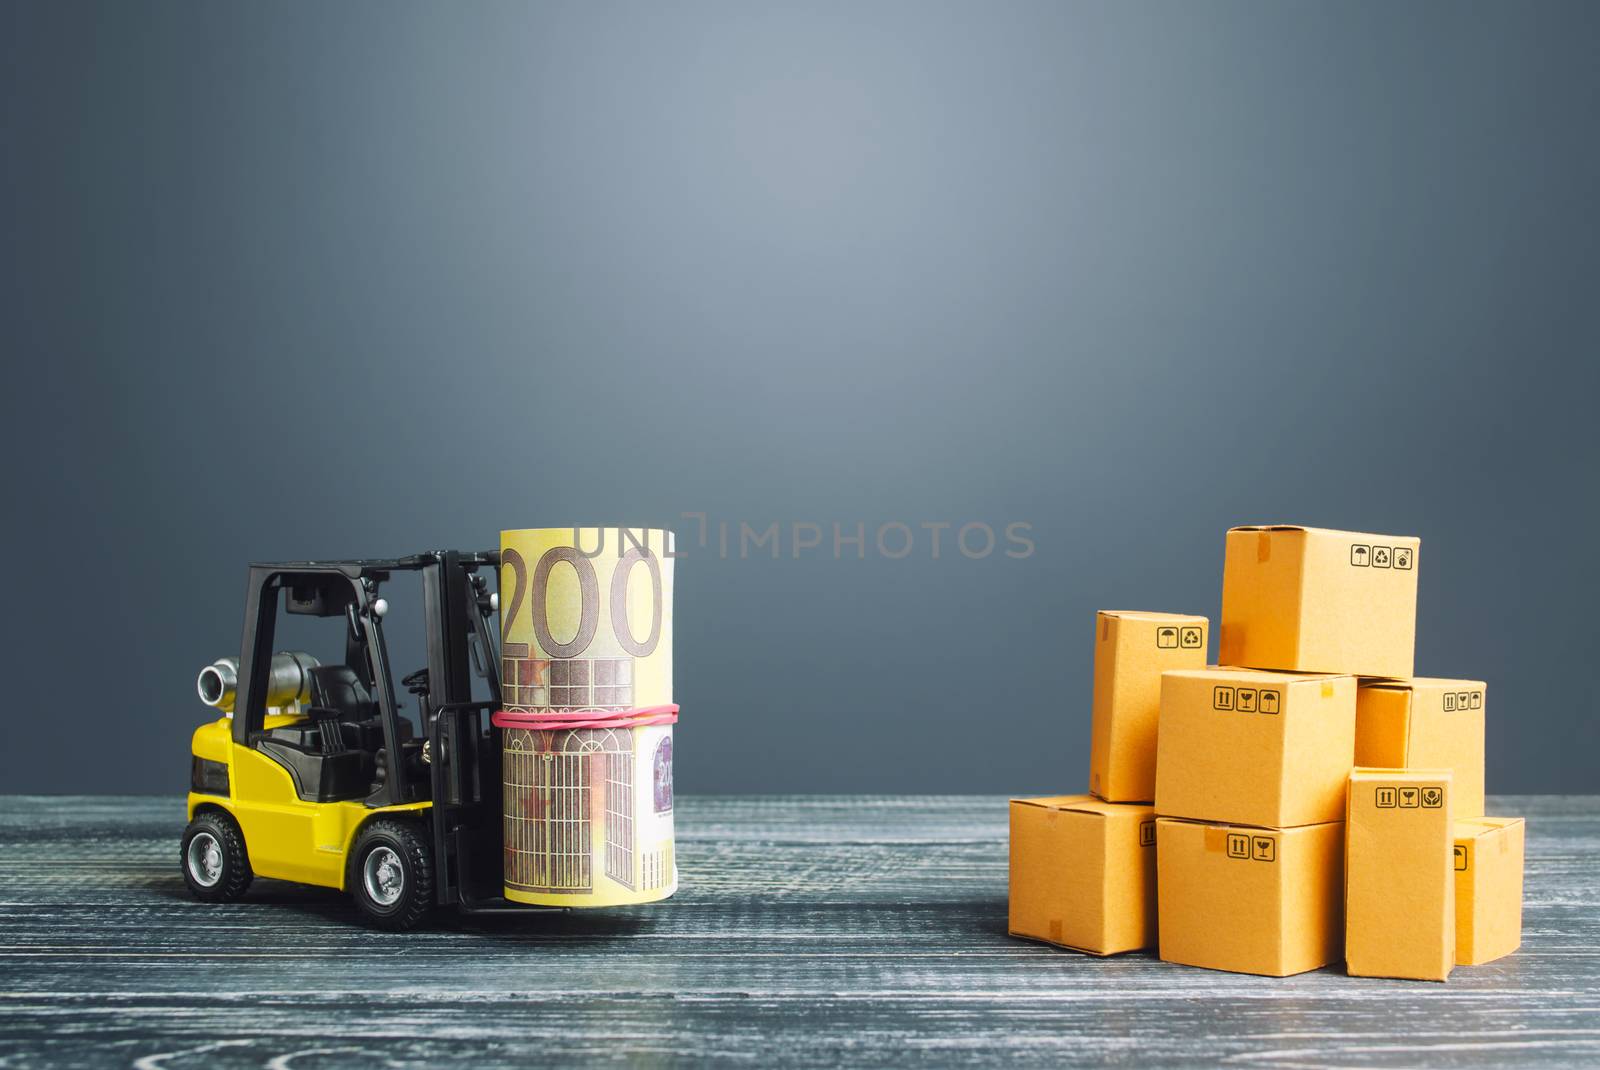 Forklift truck carries a euro bundle roll near stack of boxes. Profit from trade, exchange of goods. Investments financing in production, taxes, income revenues costs. High productivity superprofits